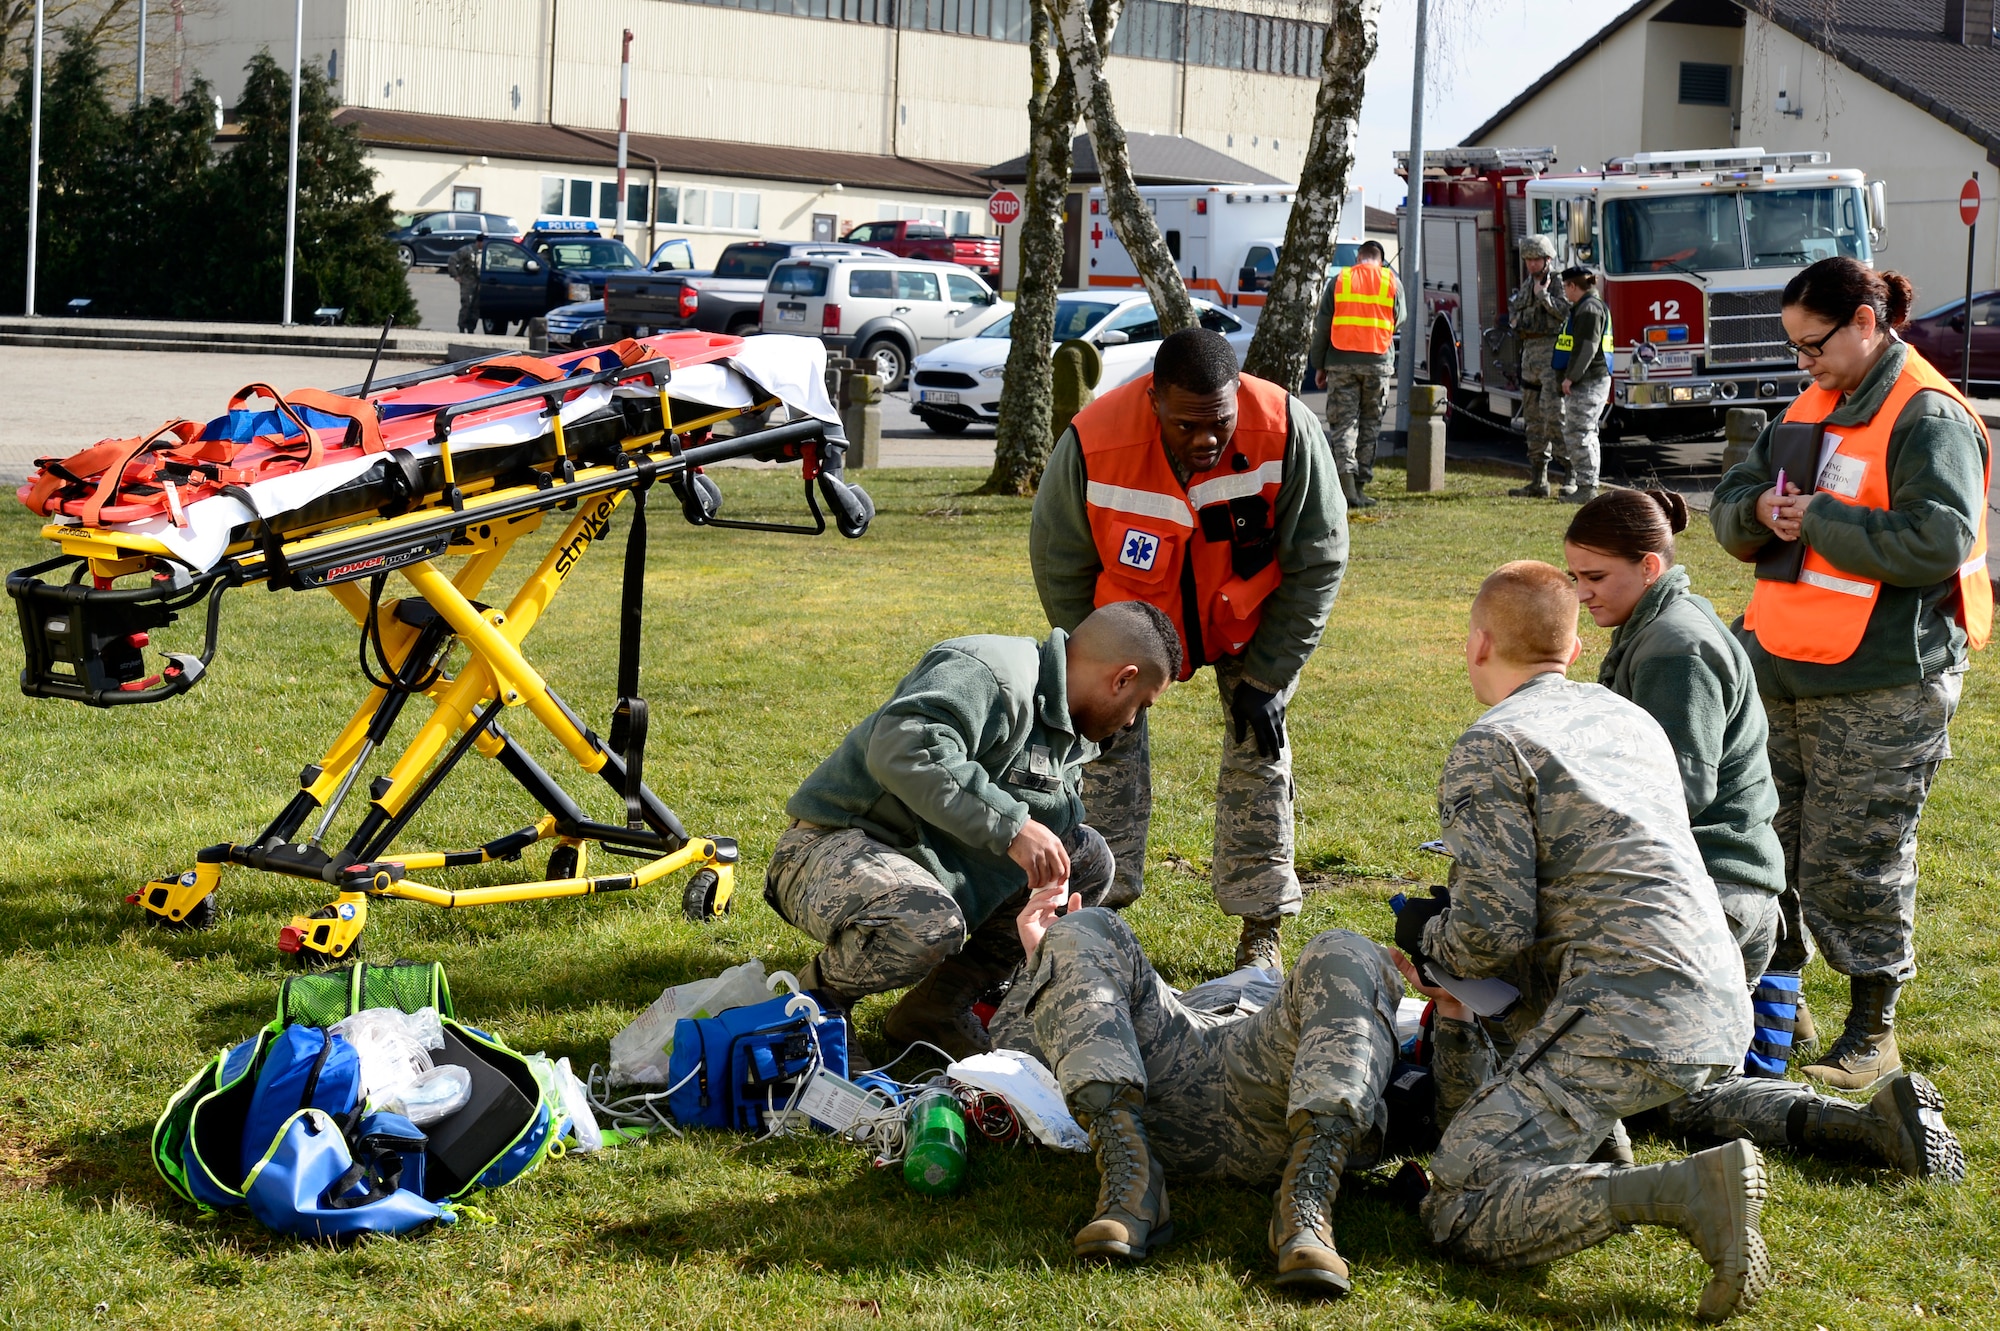 Airmen from the wing headquarters area were evacuated during the simulated fire.